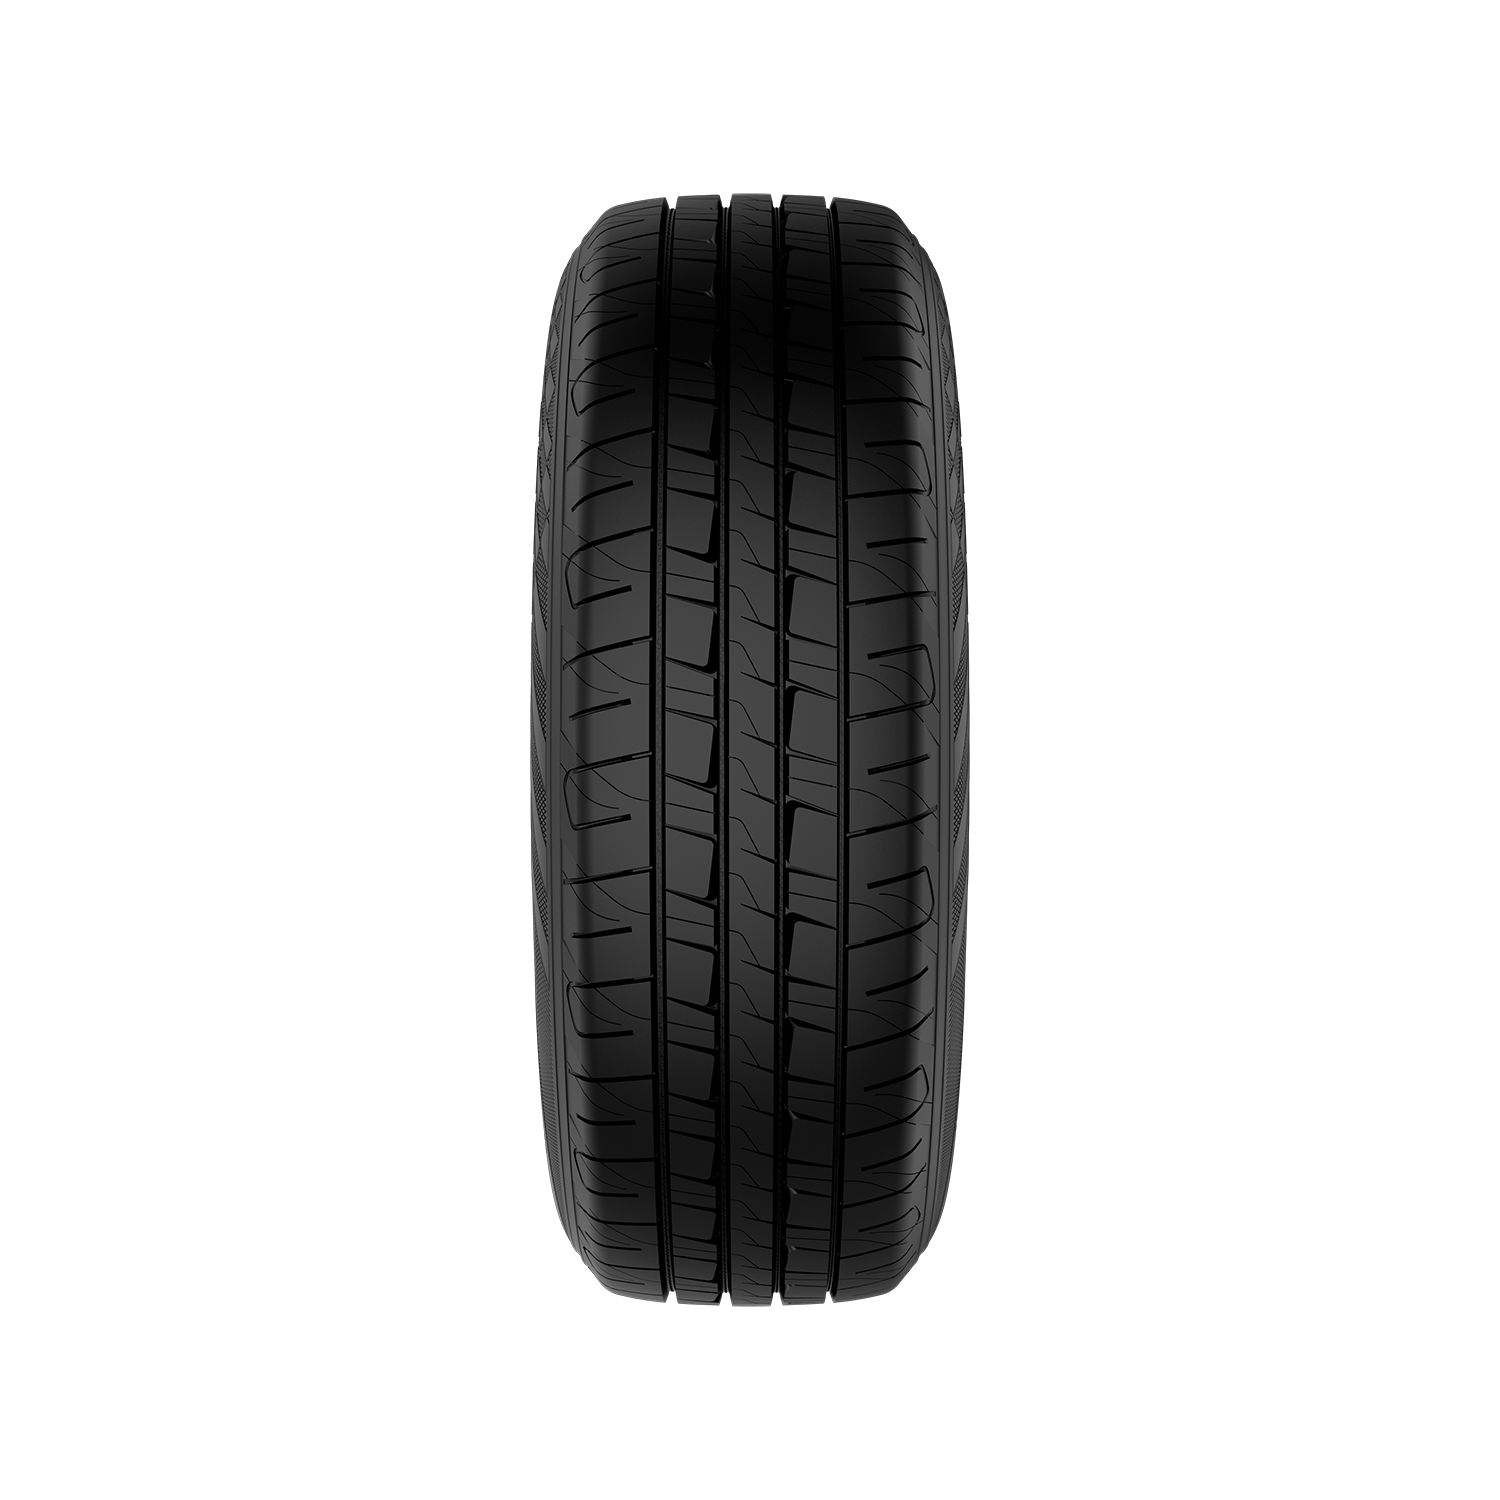 Ceat 215/60 R17 Securadrive 96h Tl at Rs 7099, Ceat Car Tyres in Mumbai